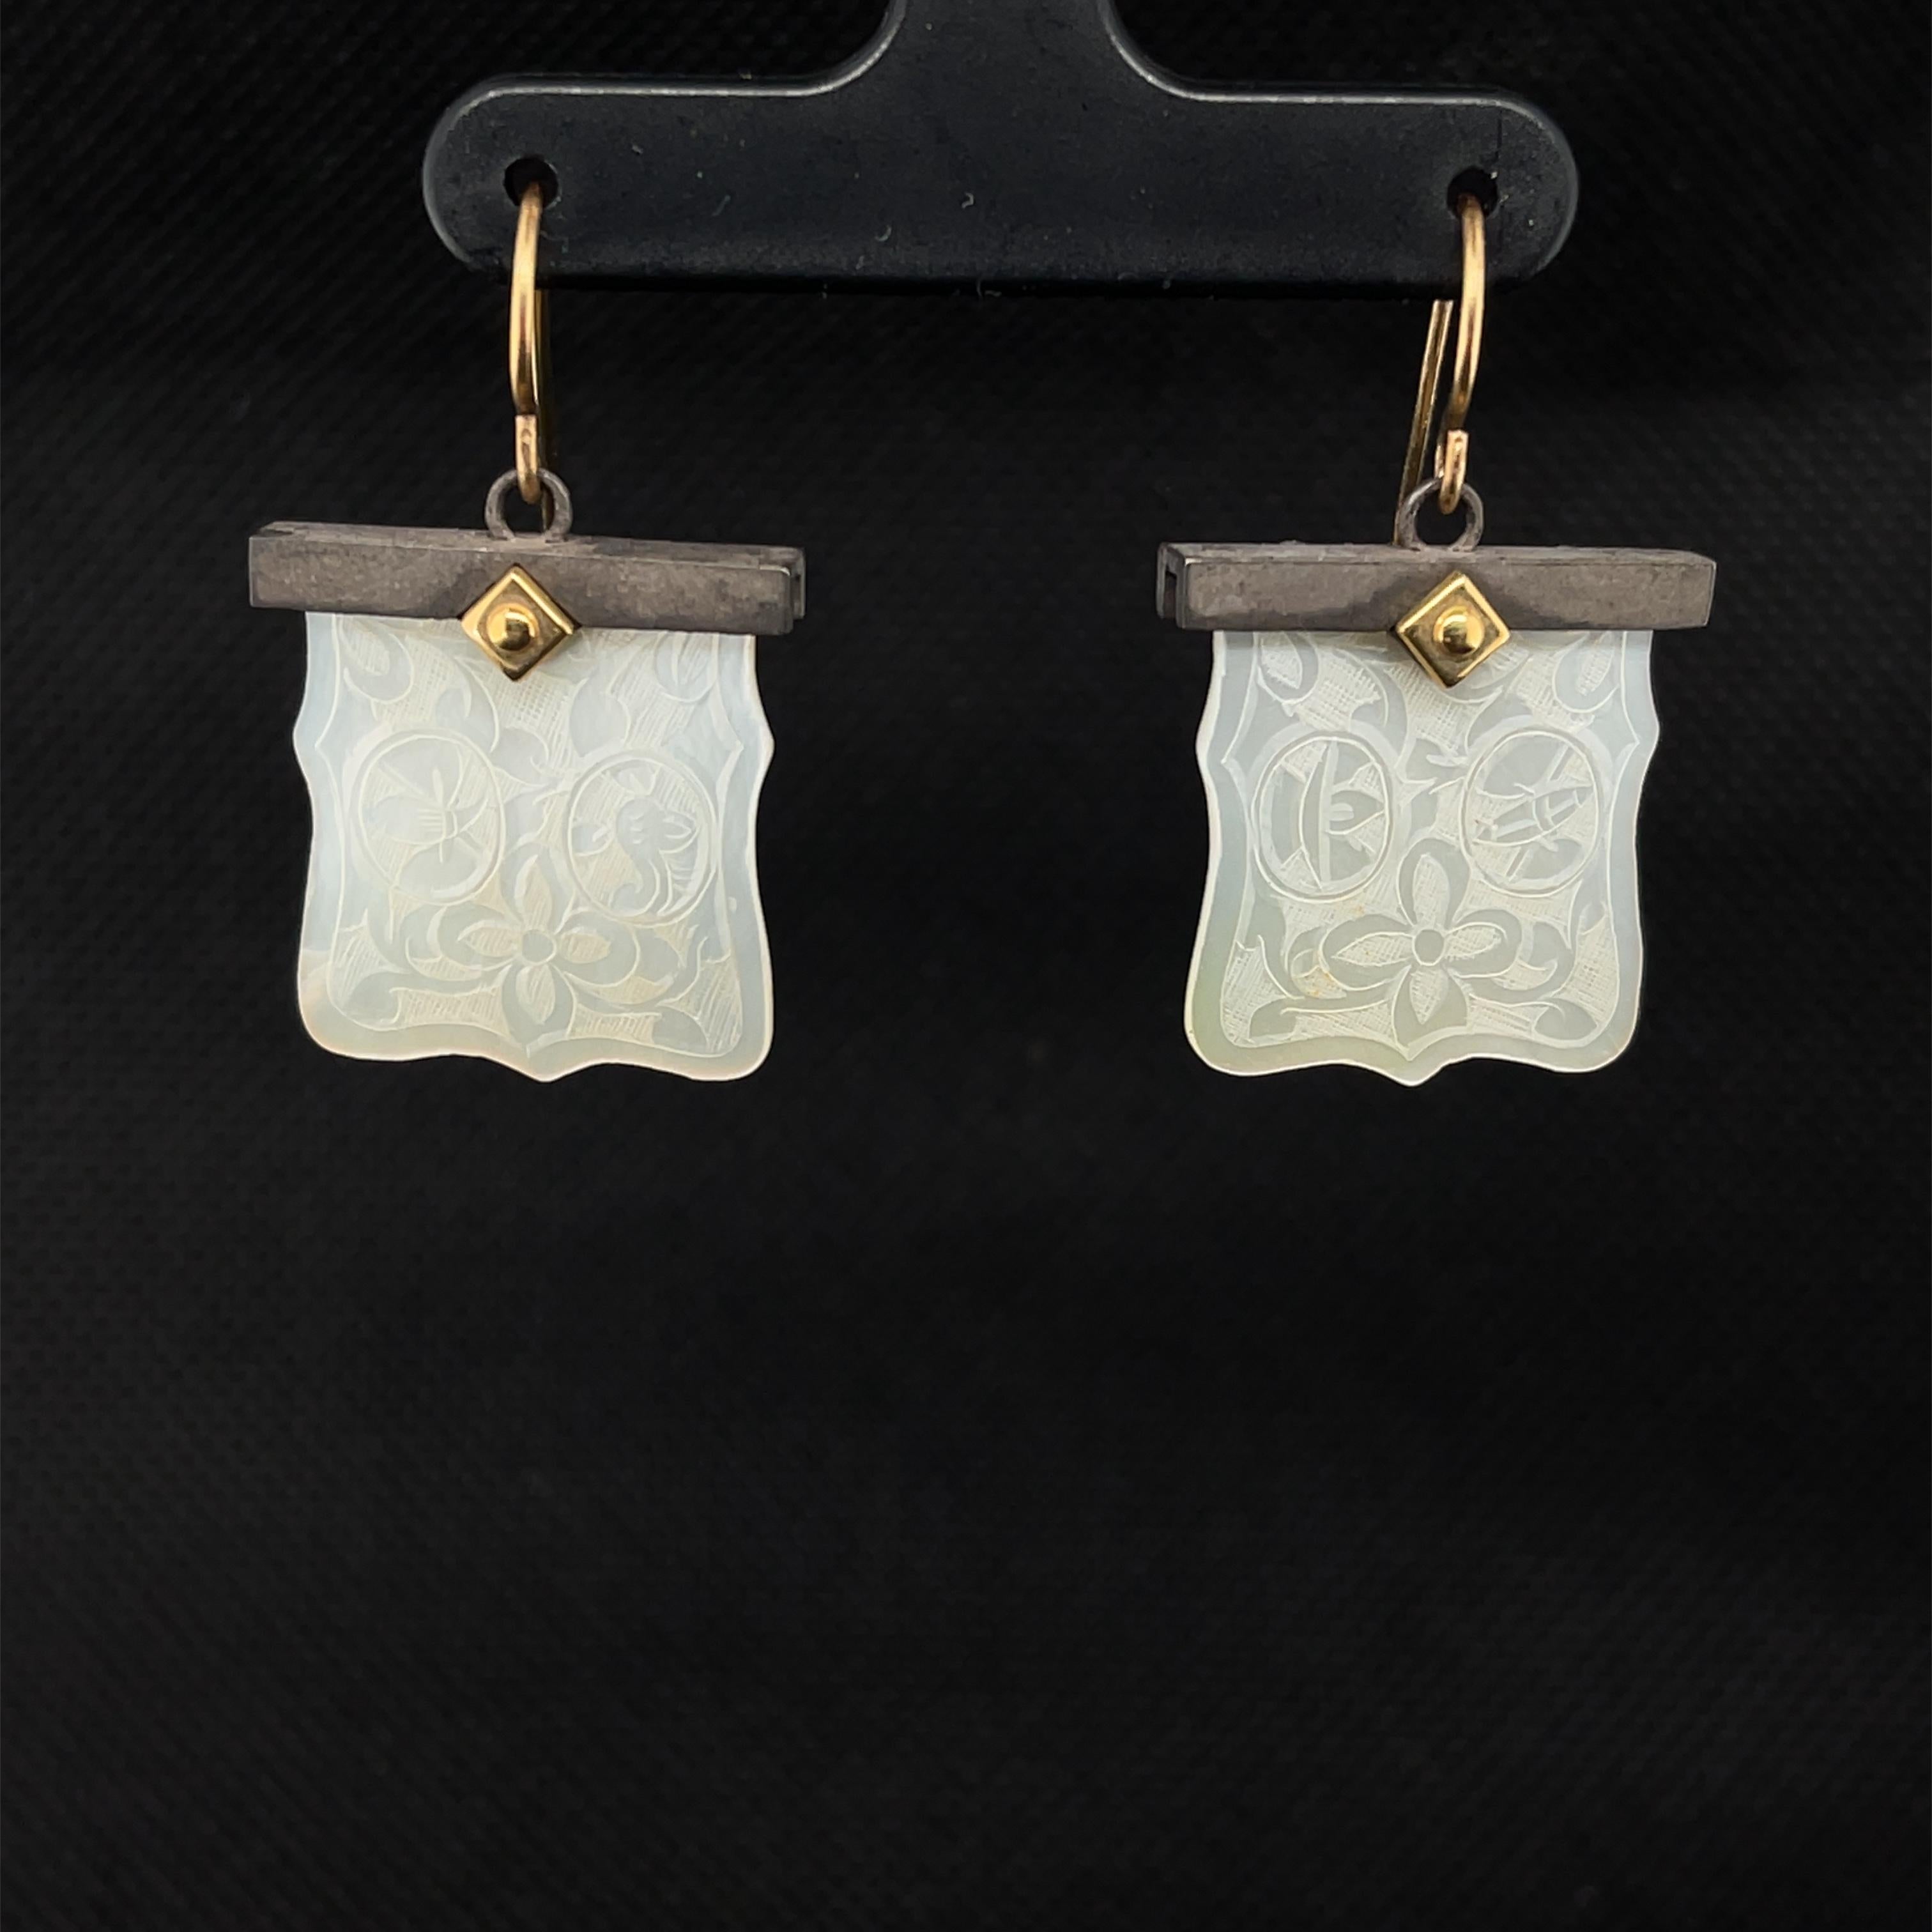 These pretty earrings feature antique, mother-of-pearl Chinese gambling counters dating back to the 18th Century. The square gaming counters with scalloped edges and flowing corners are set in striking blackened silver settings that are accented